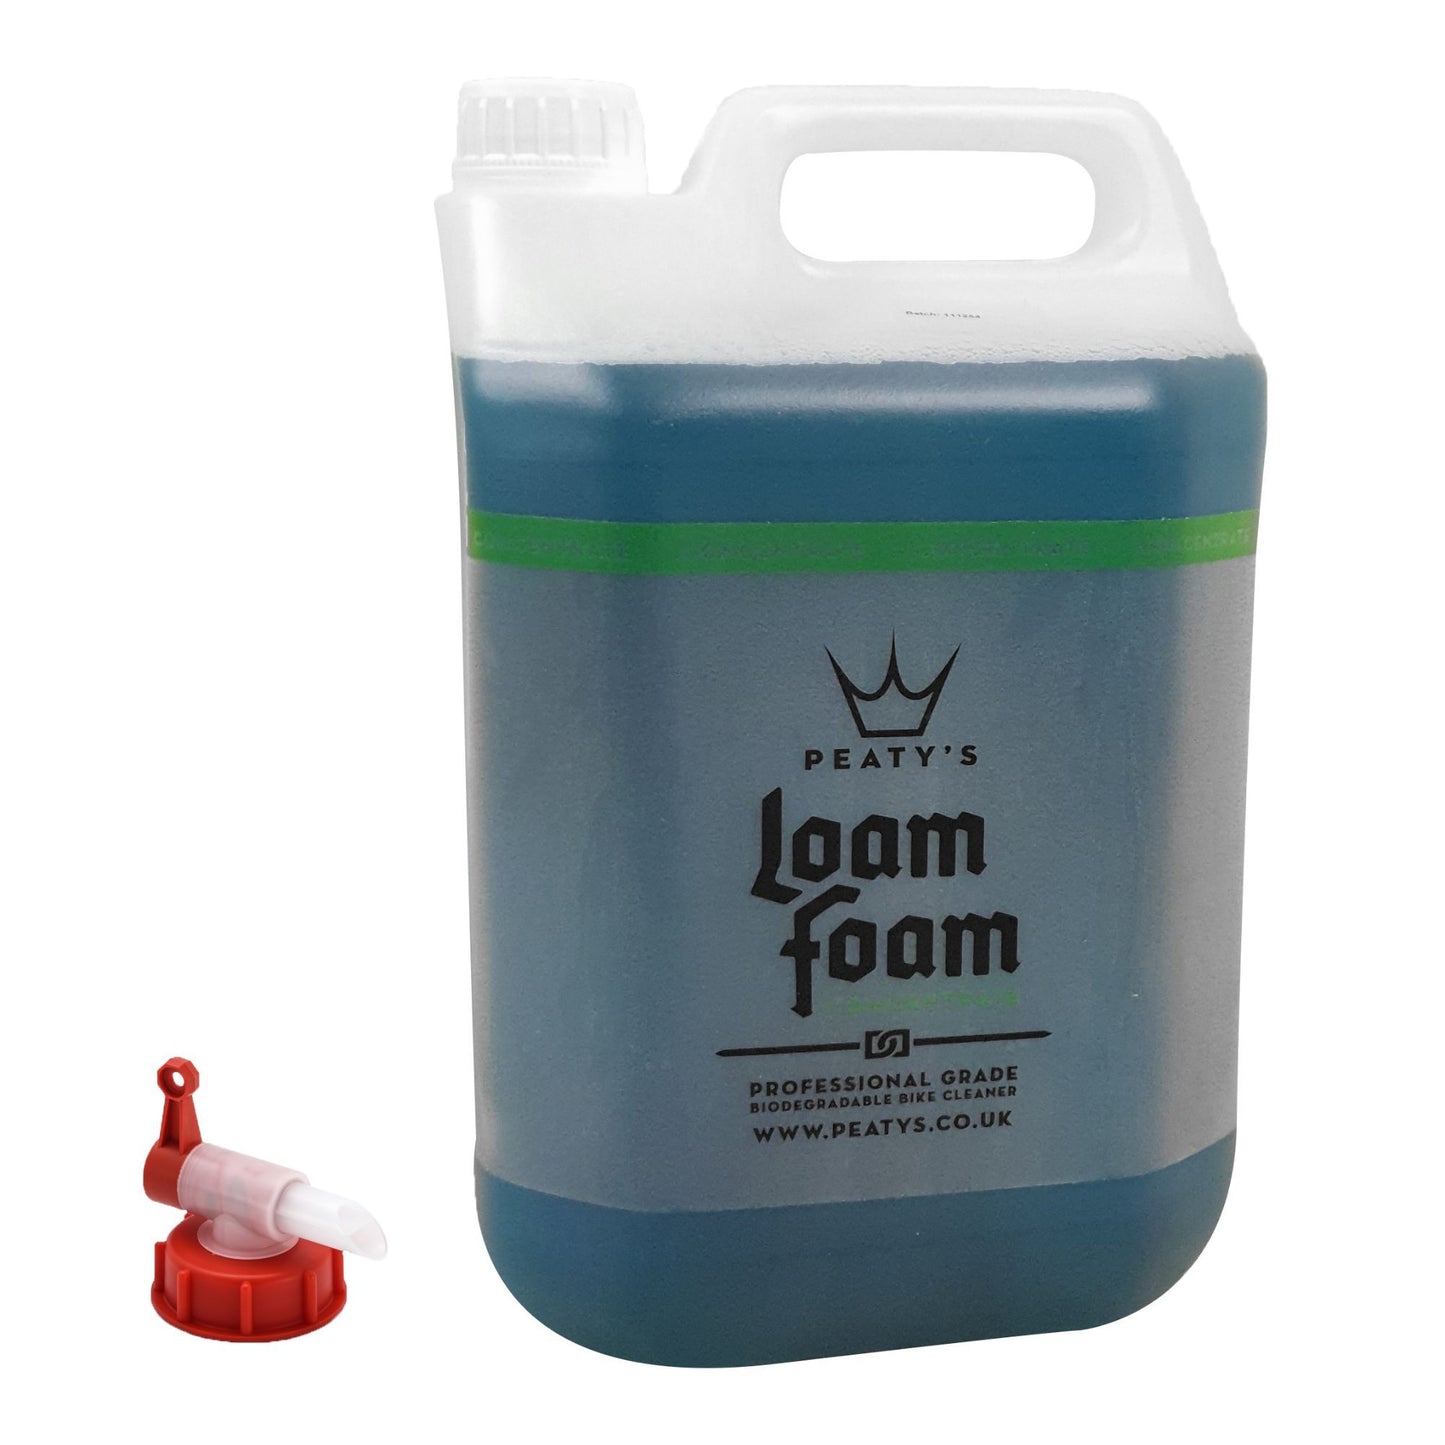 Peatys LoamFoam Concentrate Cleaner